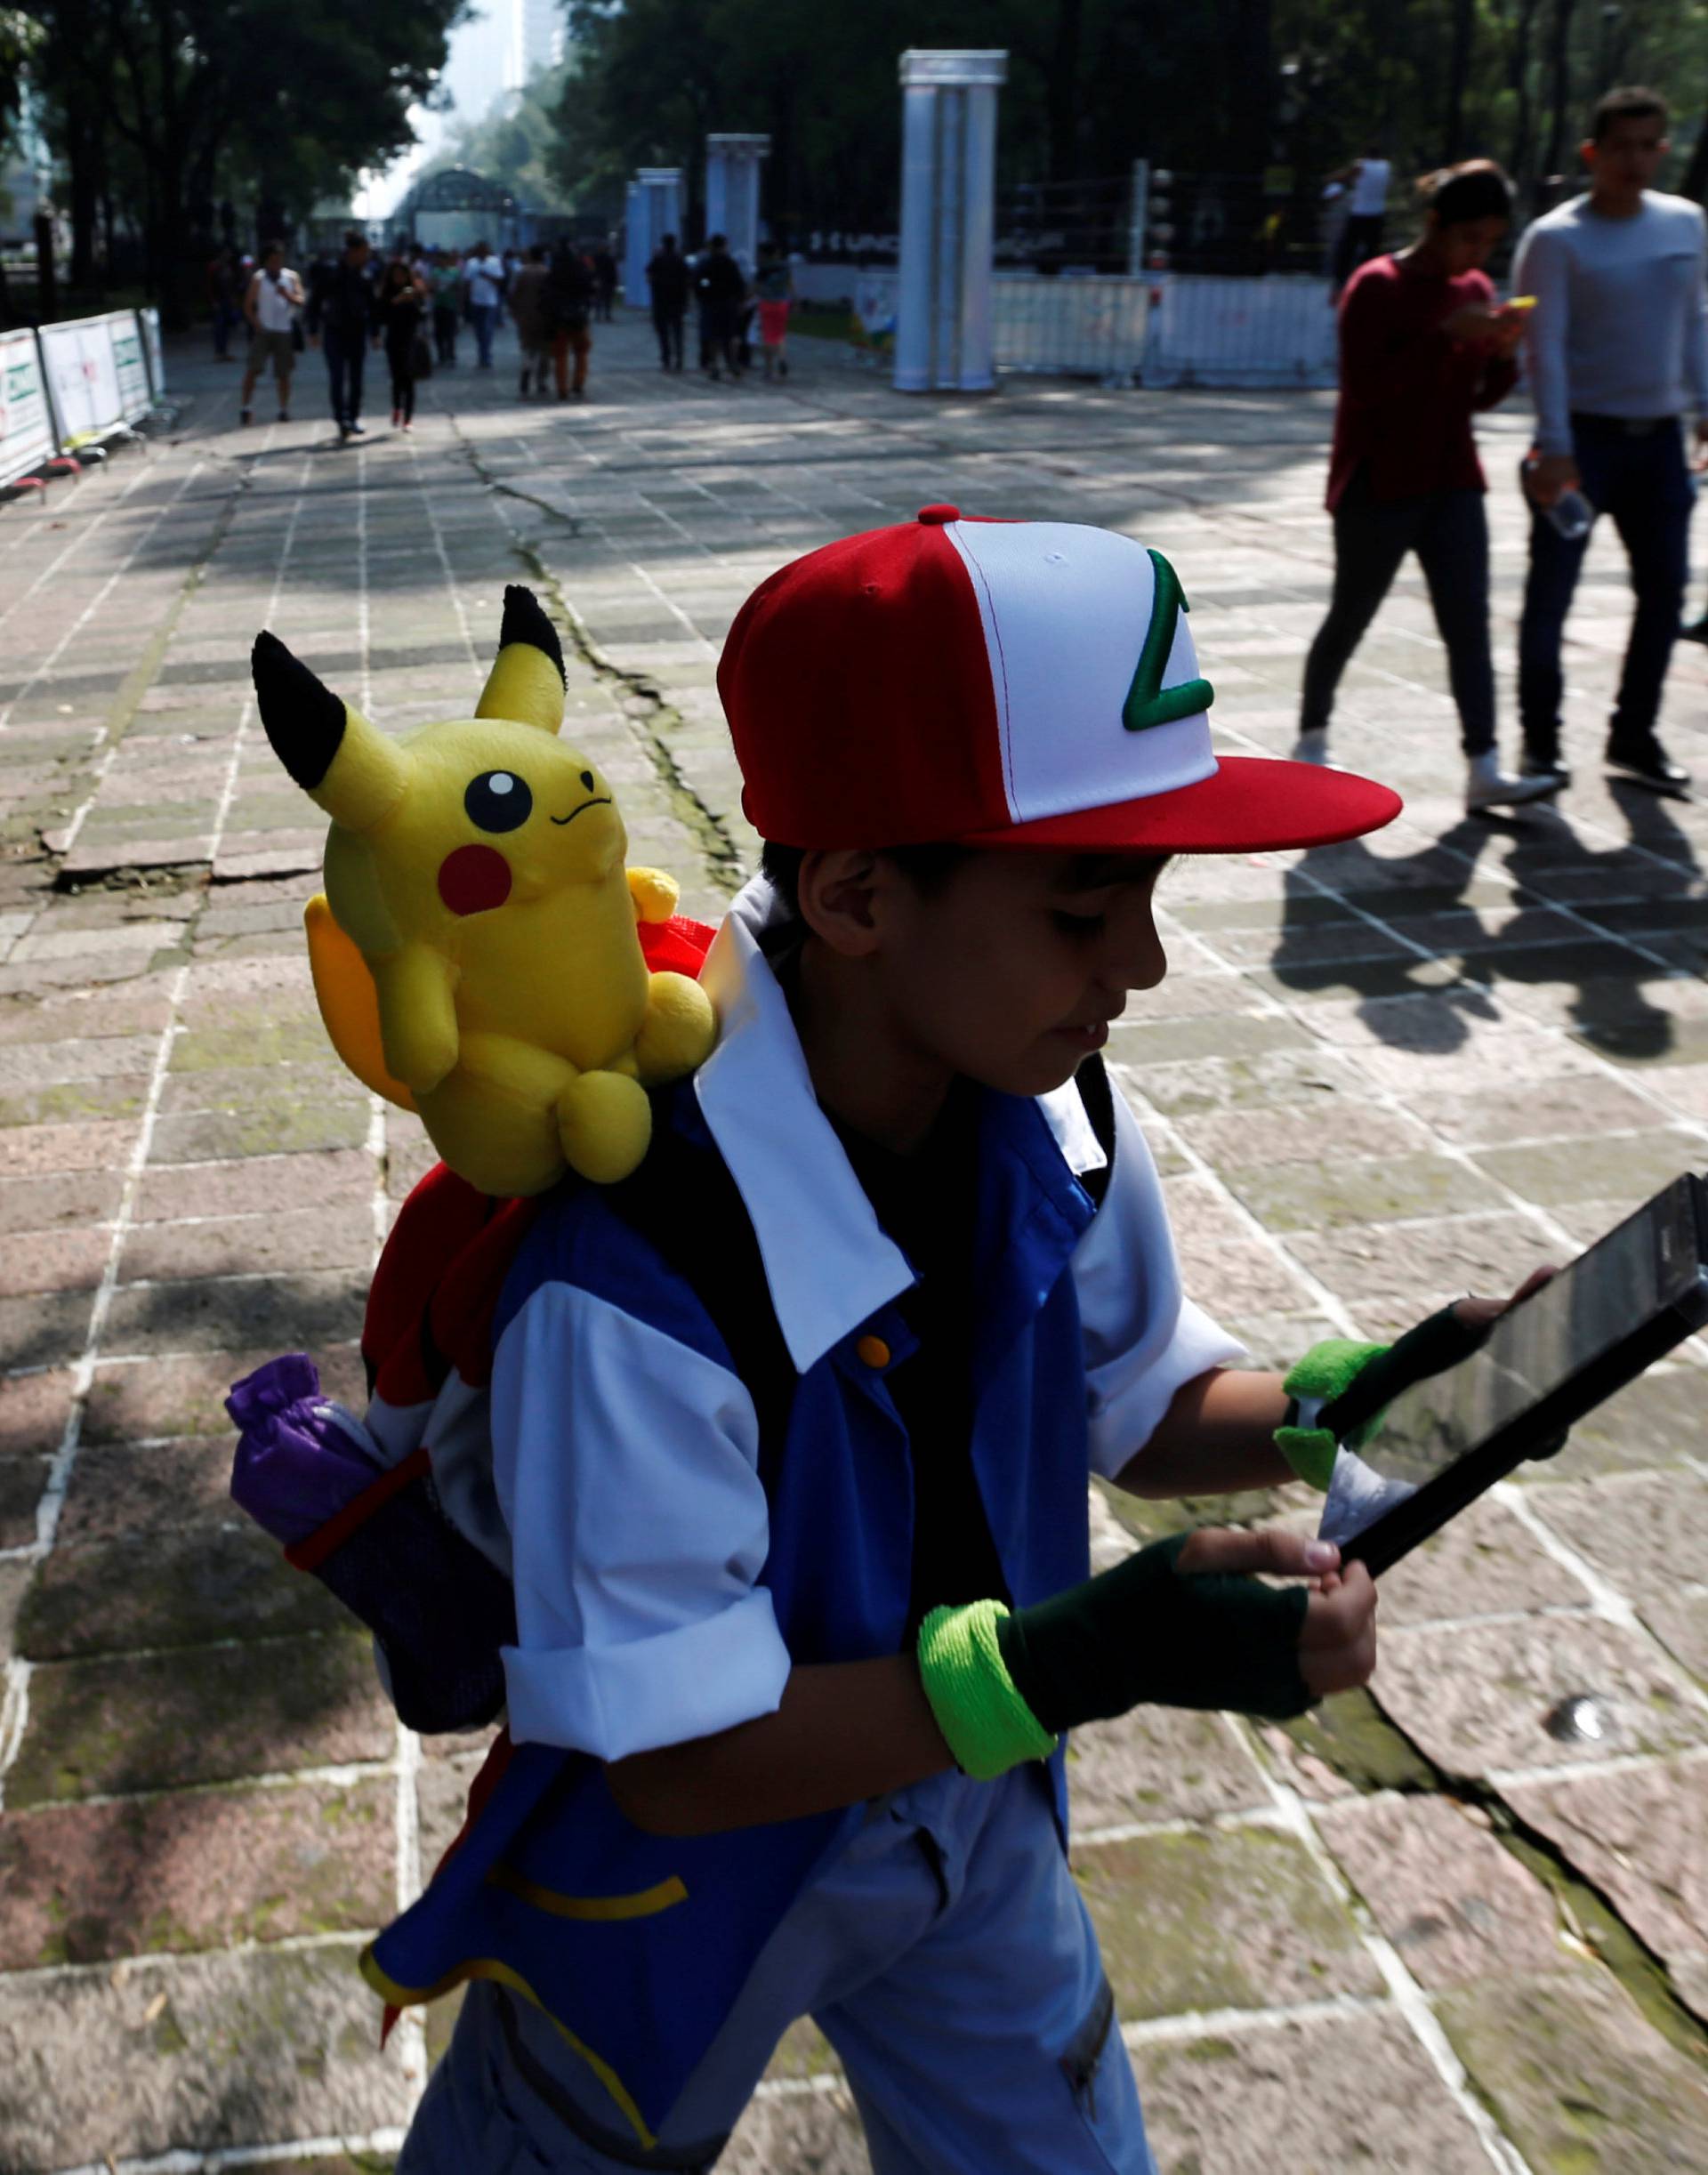 A child carries a Pokemon character, Pikachu, on his shoulder as he plays Pokemon Go during a gathering to celebrate "Pokemon Day" in Mexico City